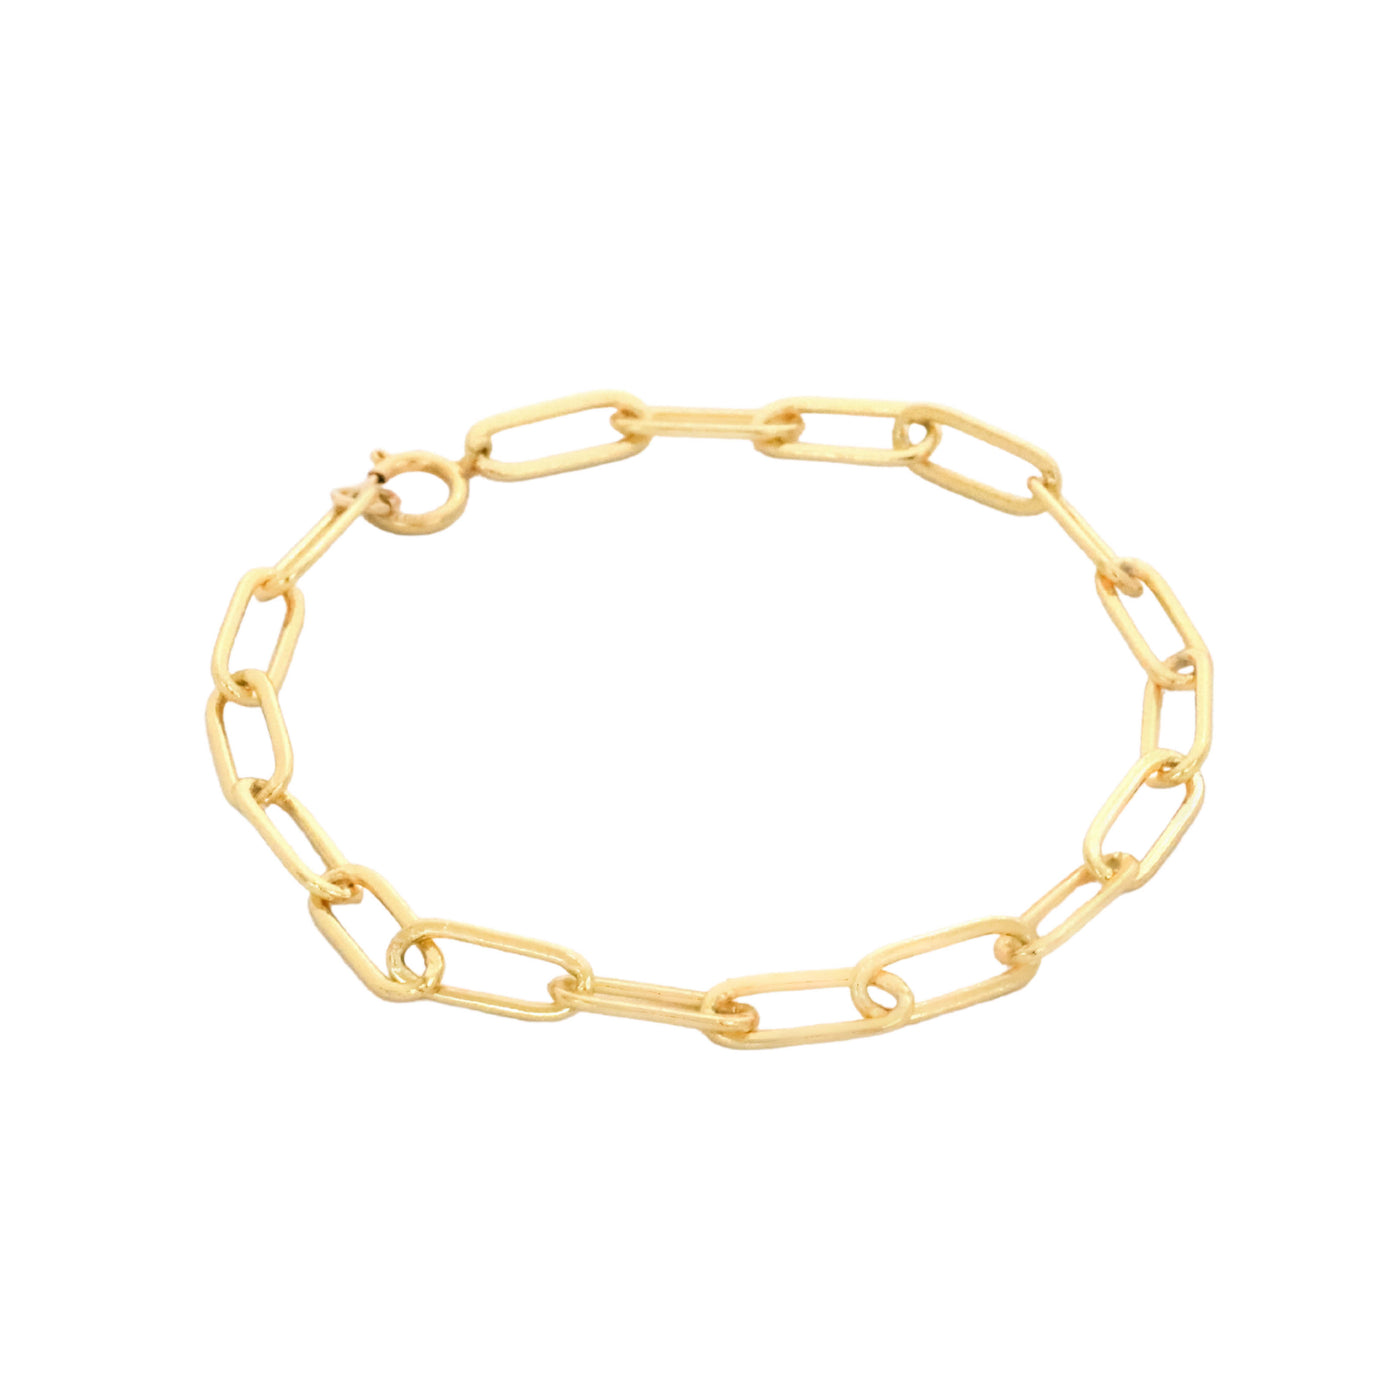 Gold plated paper clip chain bracelet